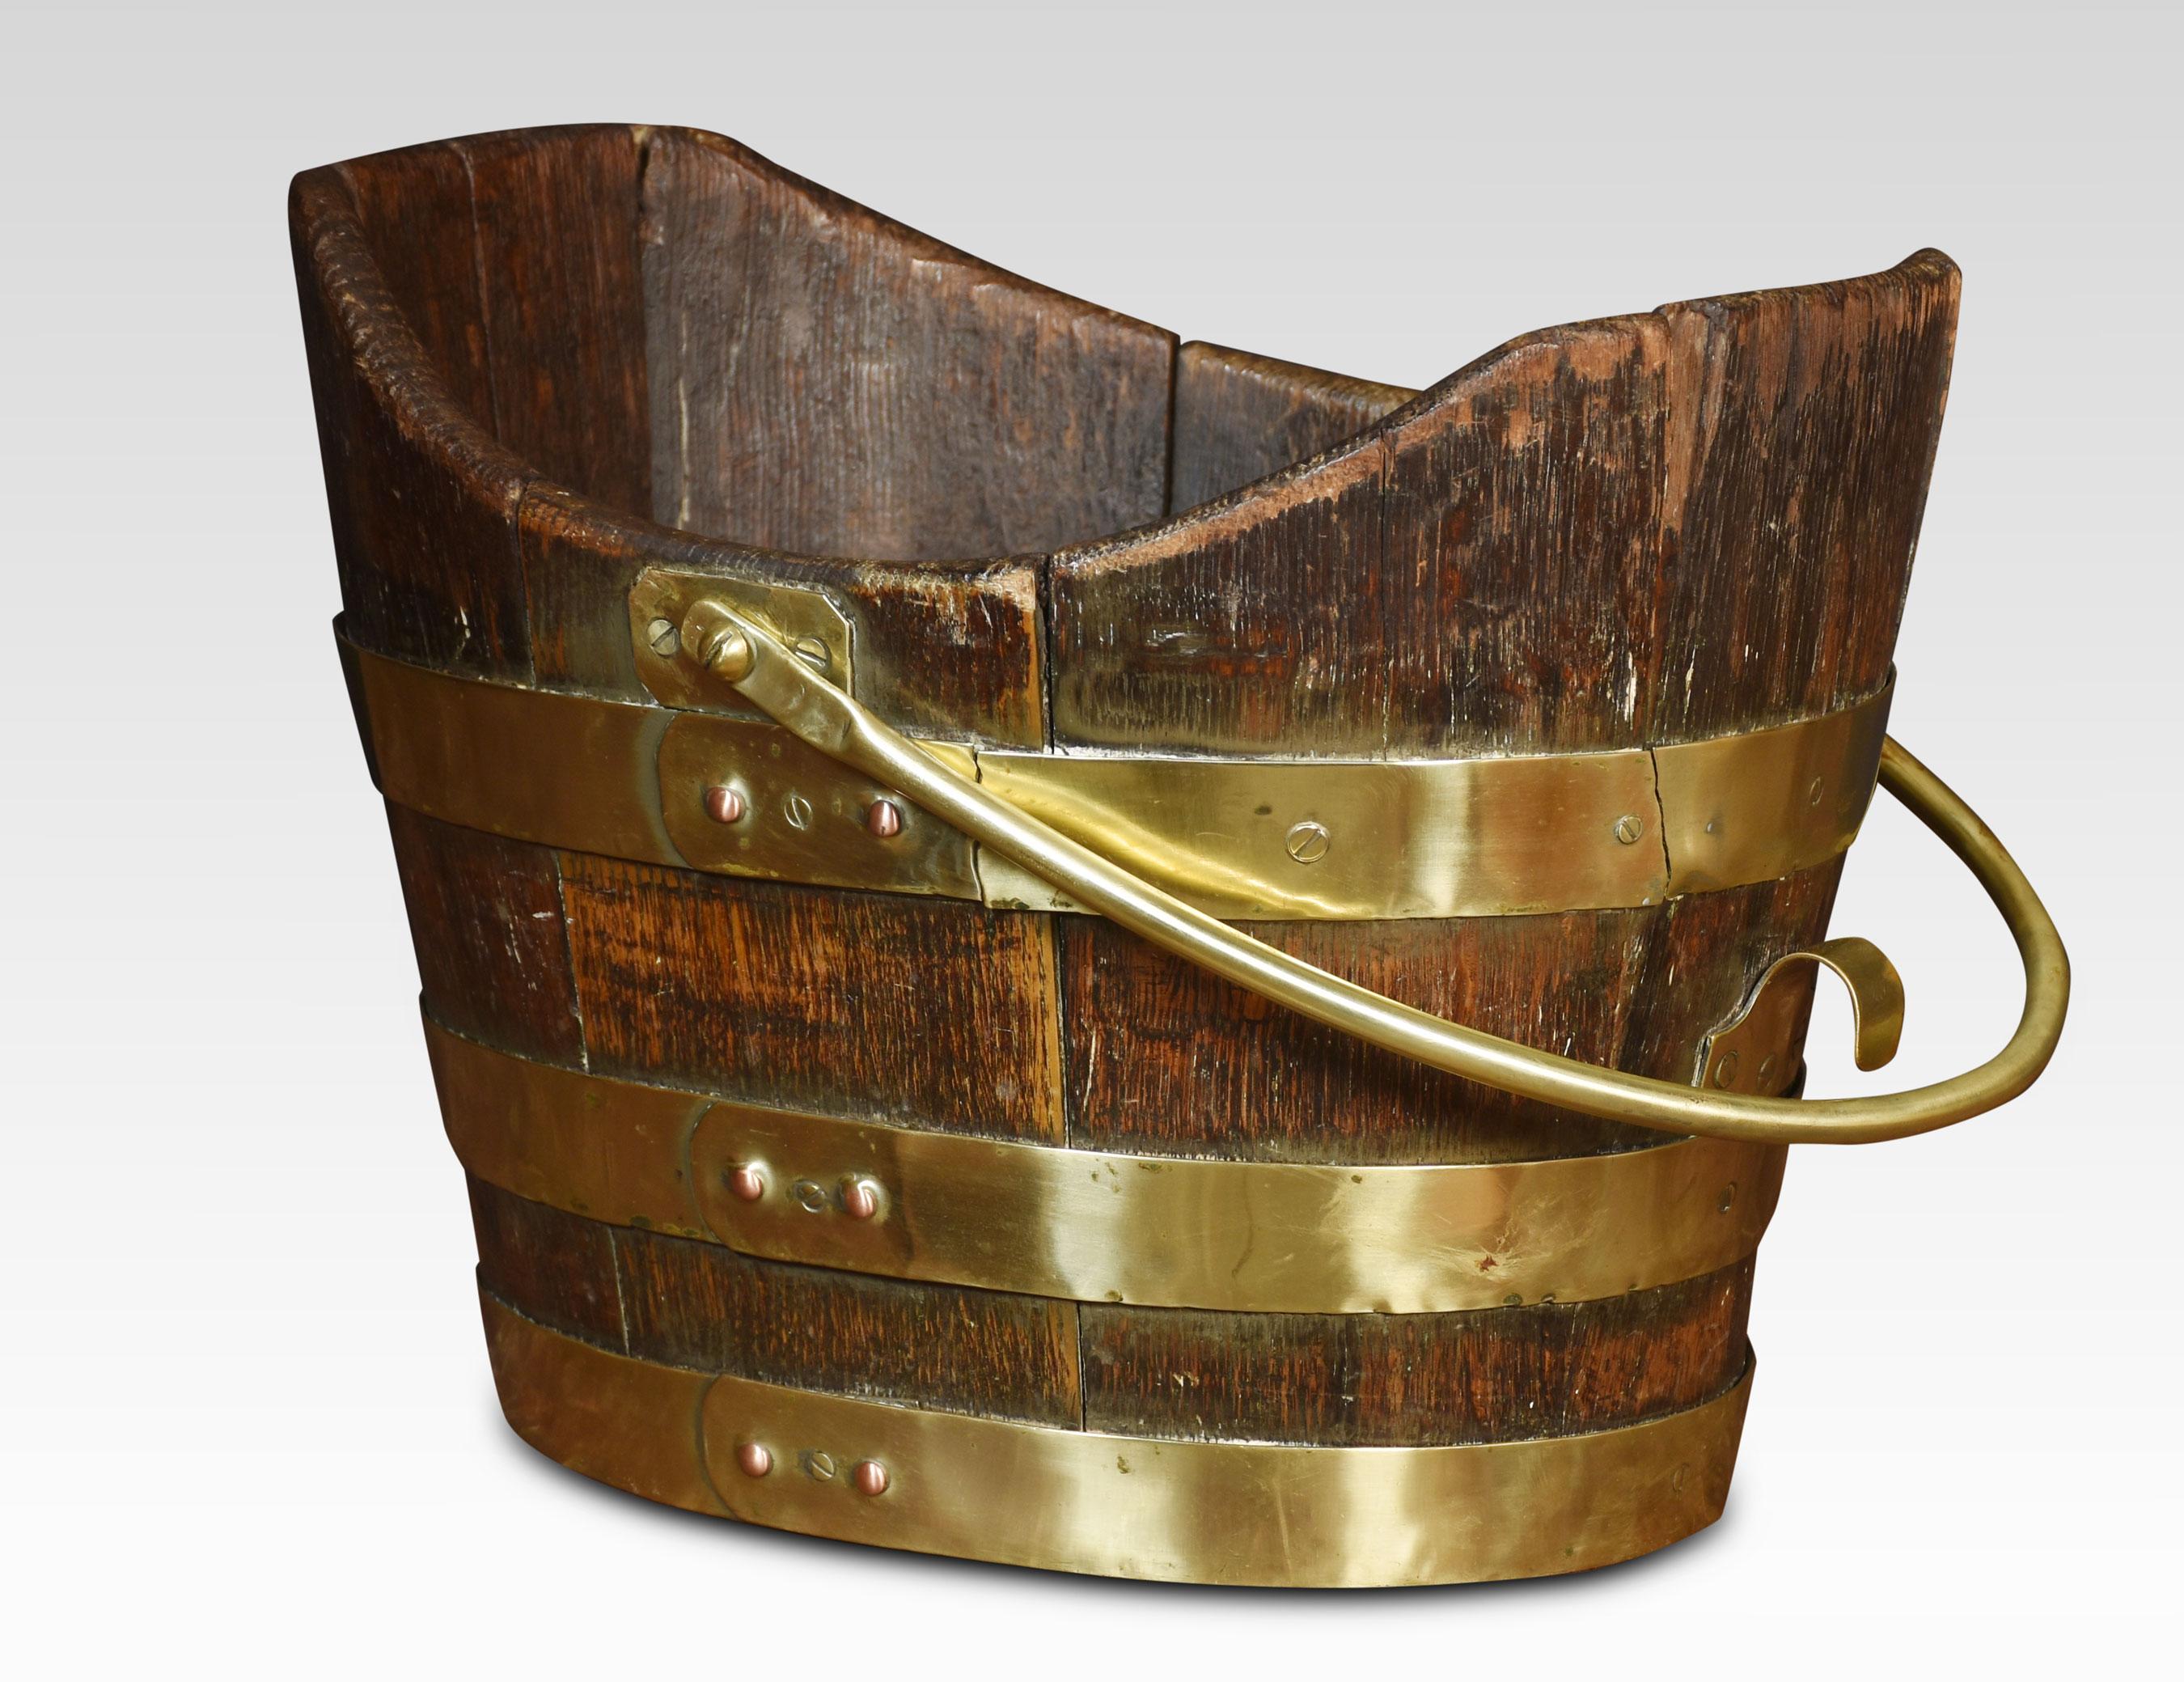 George III peat bucket with handle above the oak frame encased in brass bands.
Dimensions
Height 10.5 Inches
Width 15 Inches
Depth 12 Inches